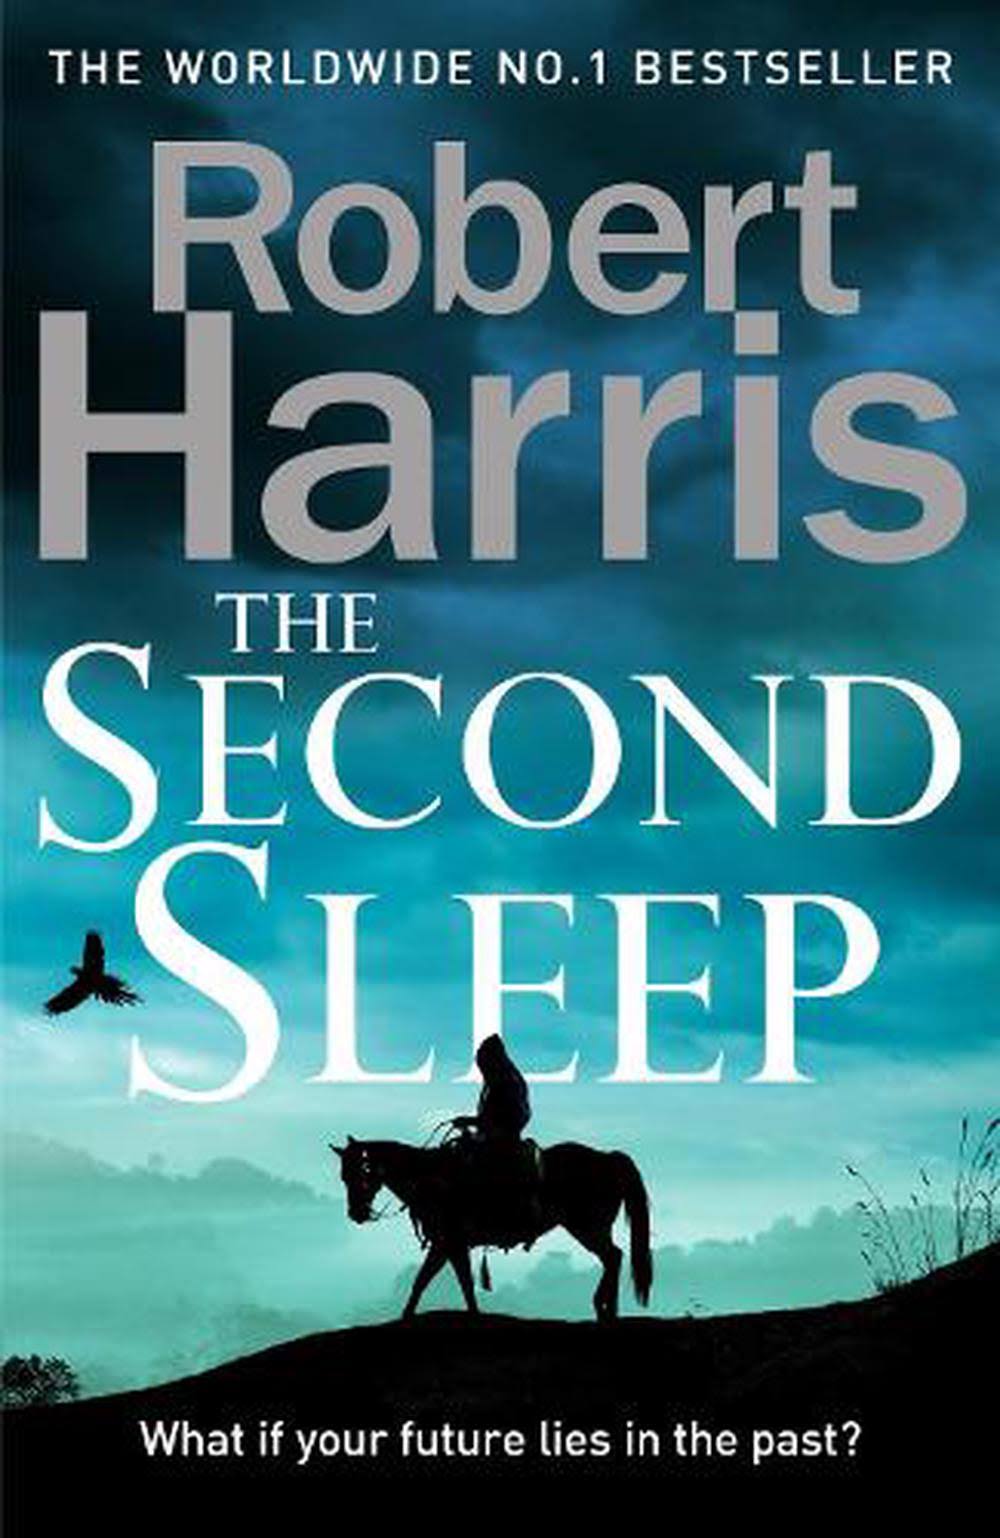 The Second Sleep - The Sunday Times #1 Bestselling Novel